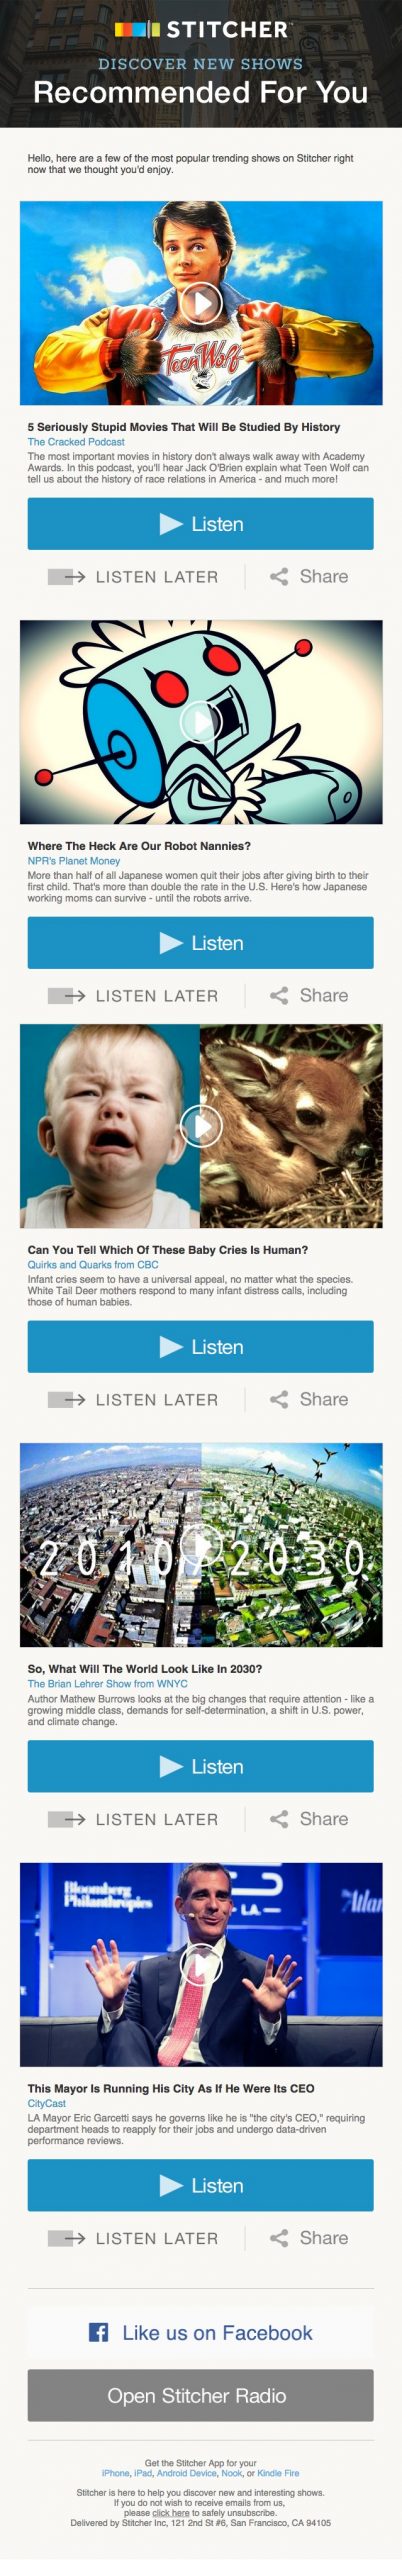 Email marketing campaign example by Stitcher showing 'Recommended for You' content